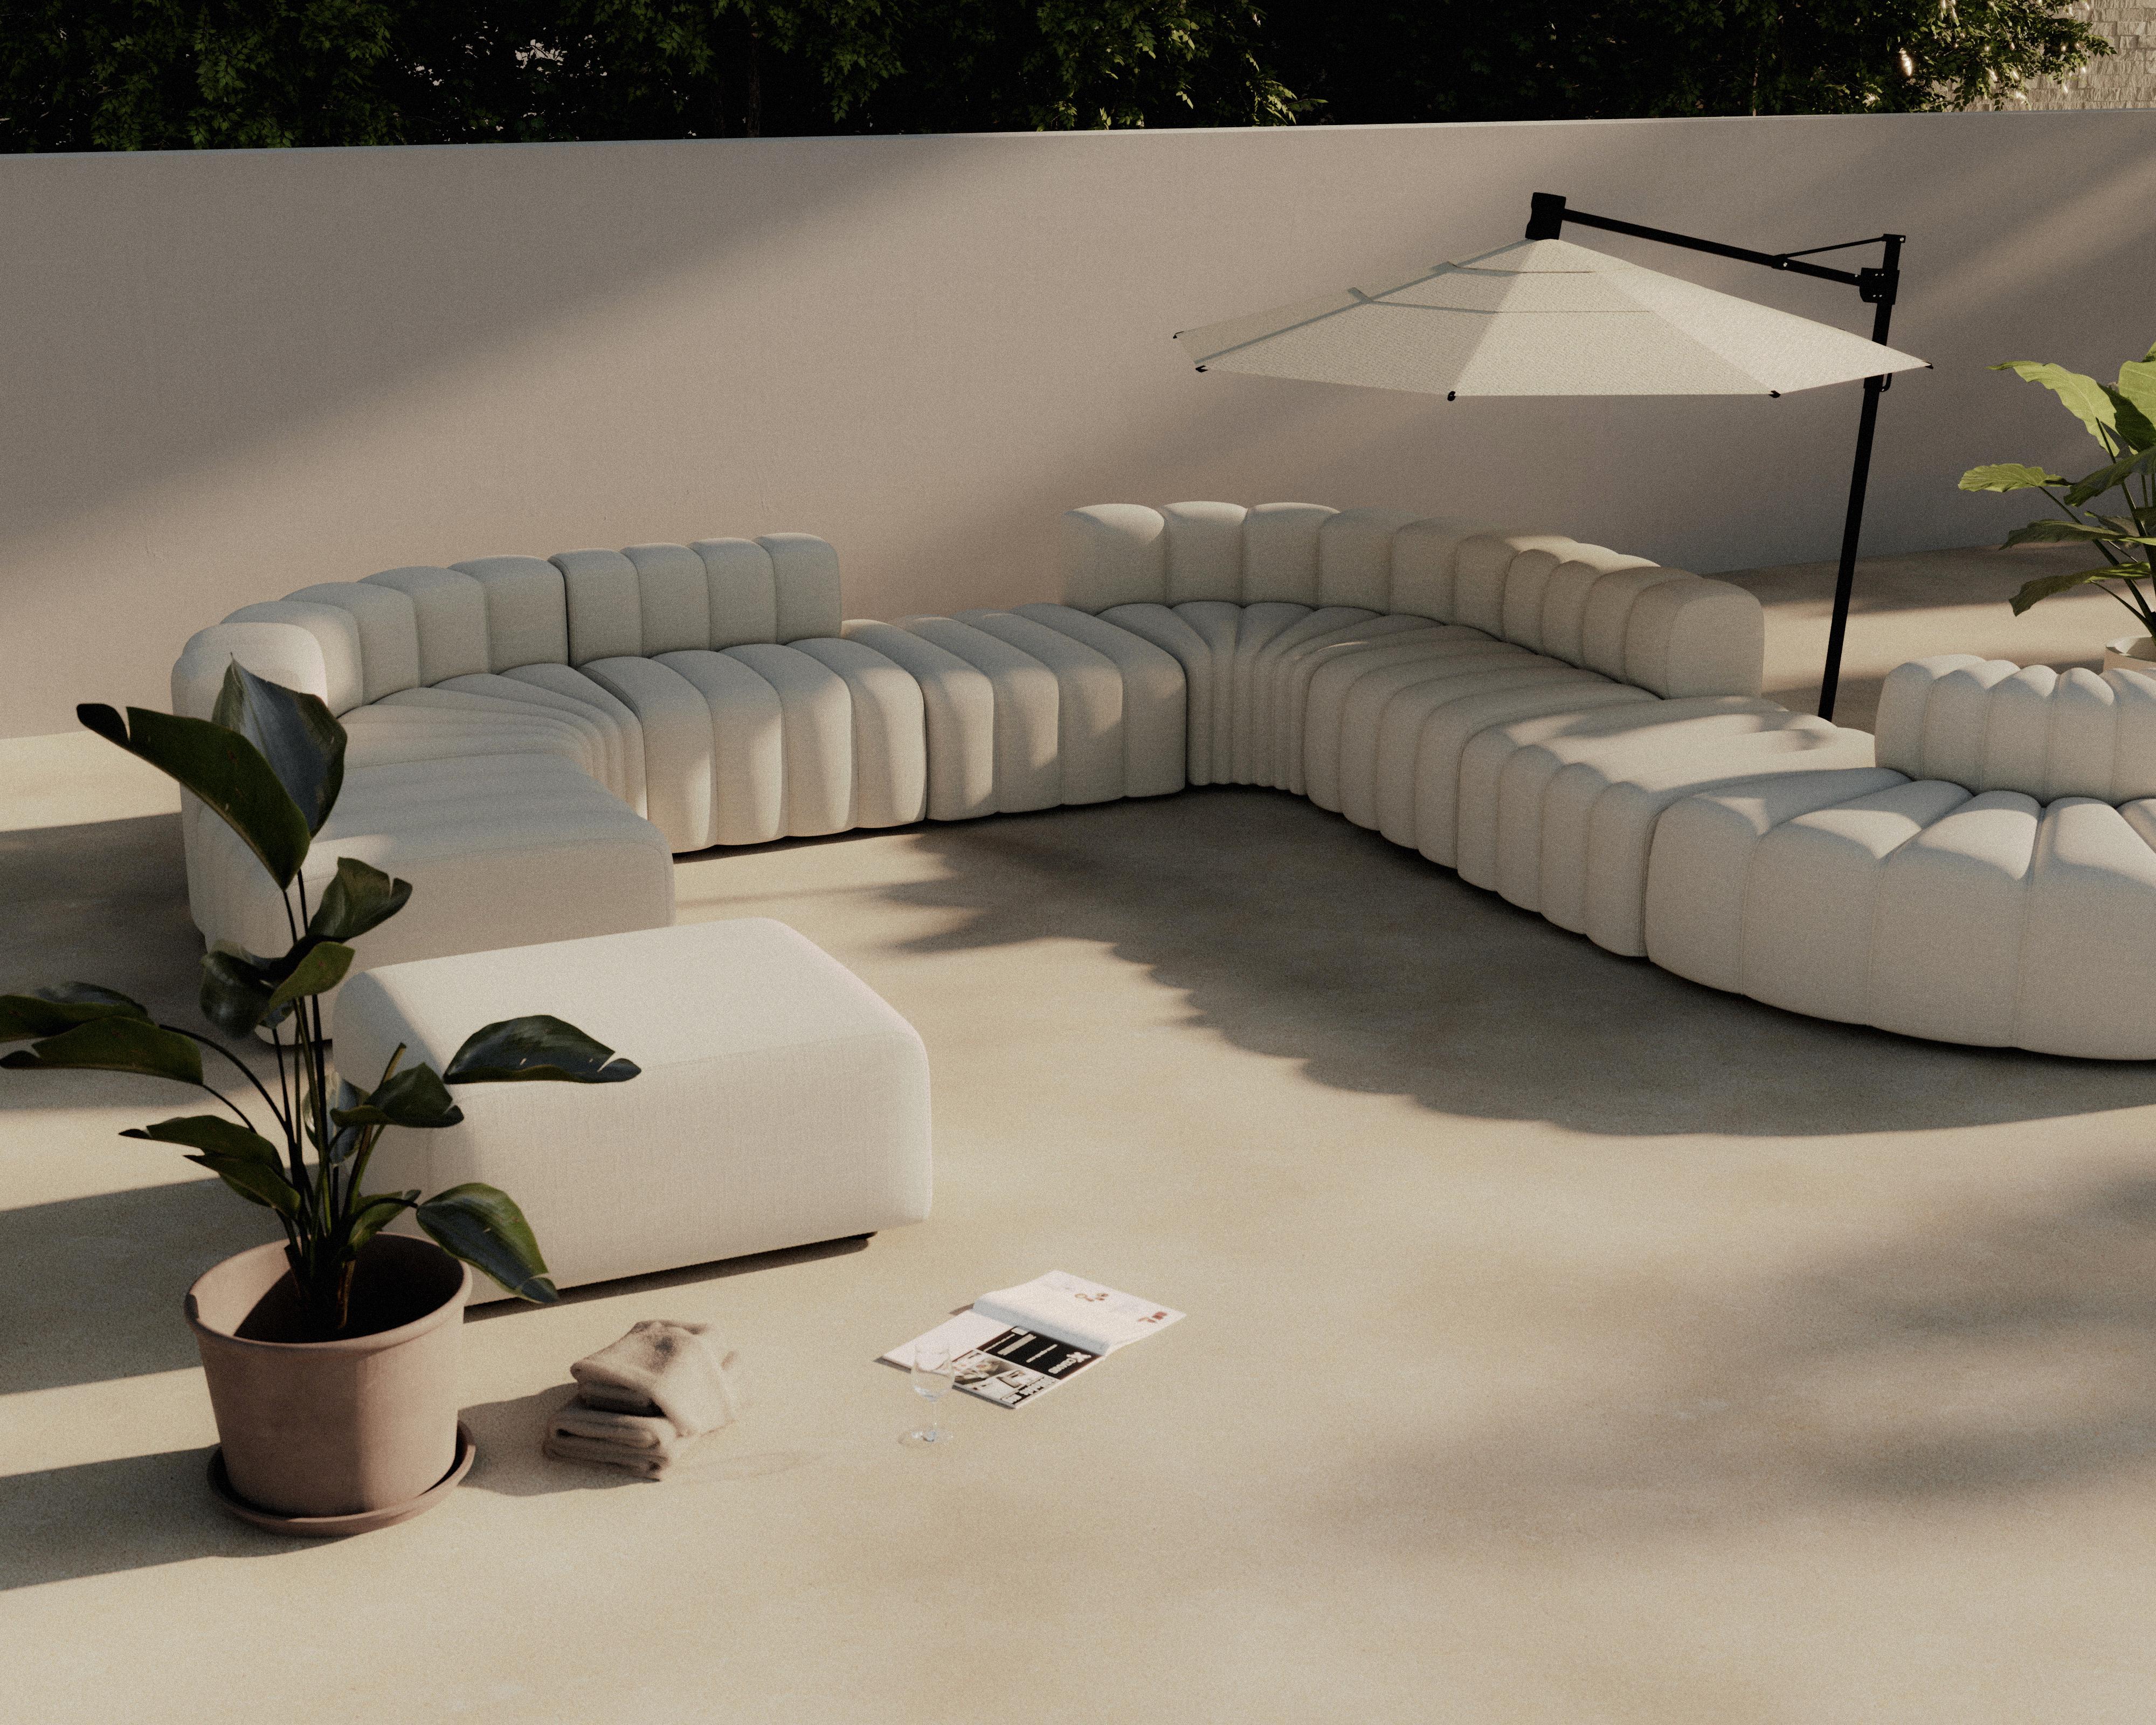 Other Studio Corner Modular Outdoor Sofa by NORR11 For Sale